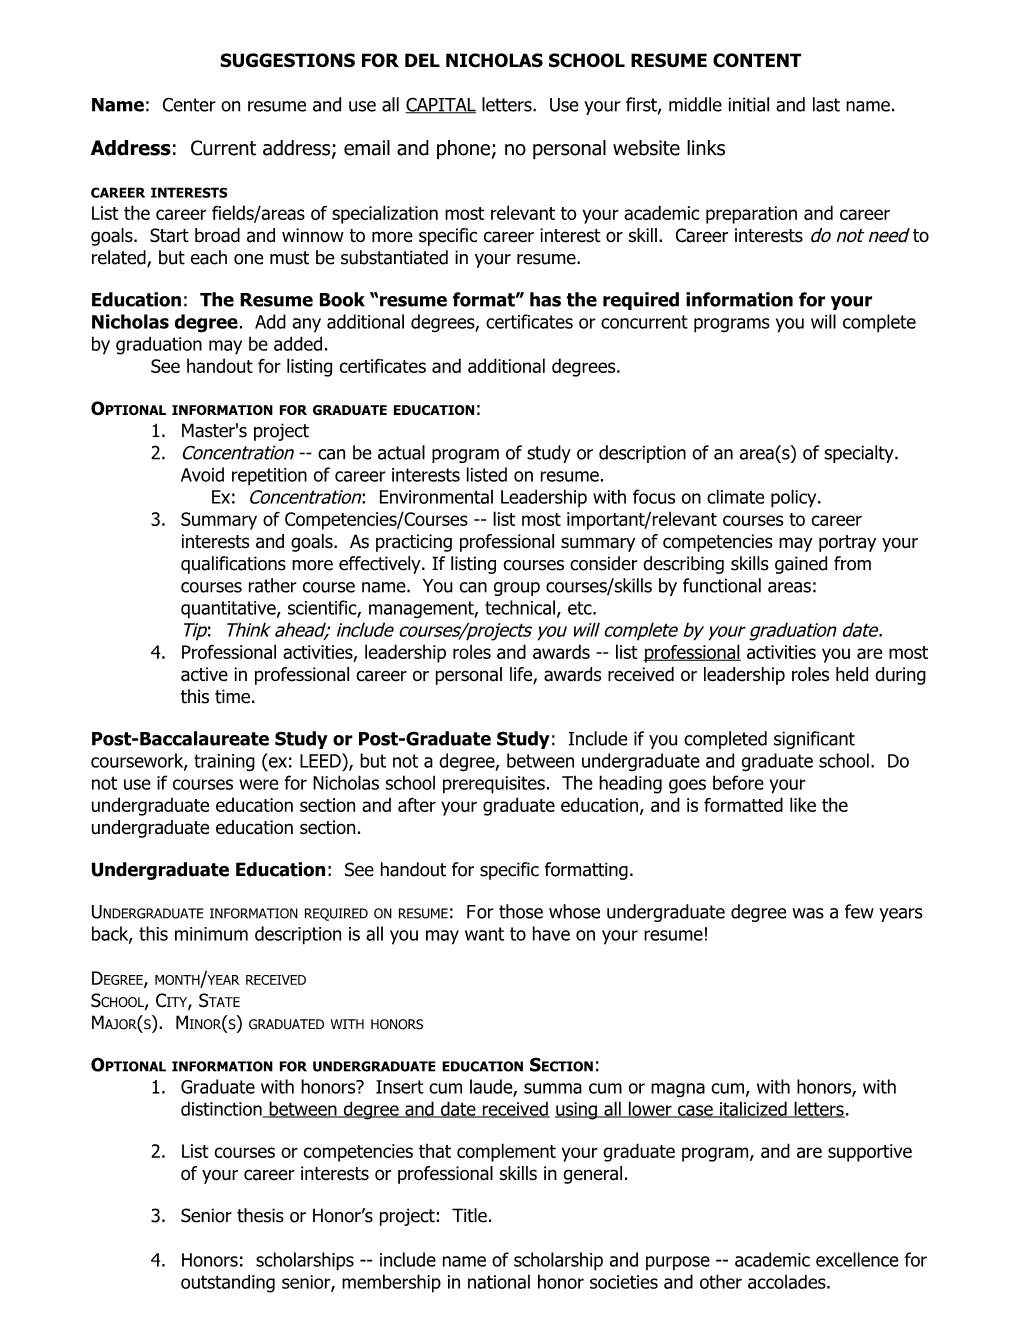 Suggestions for Resume Content